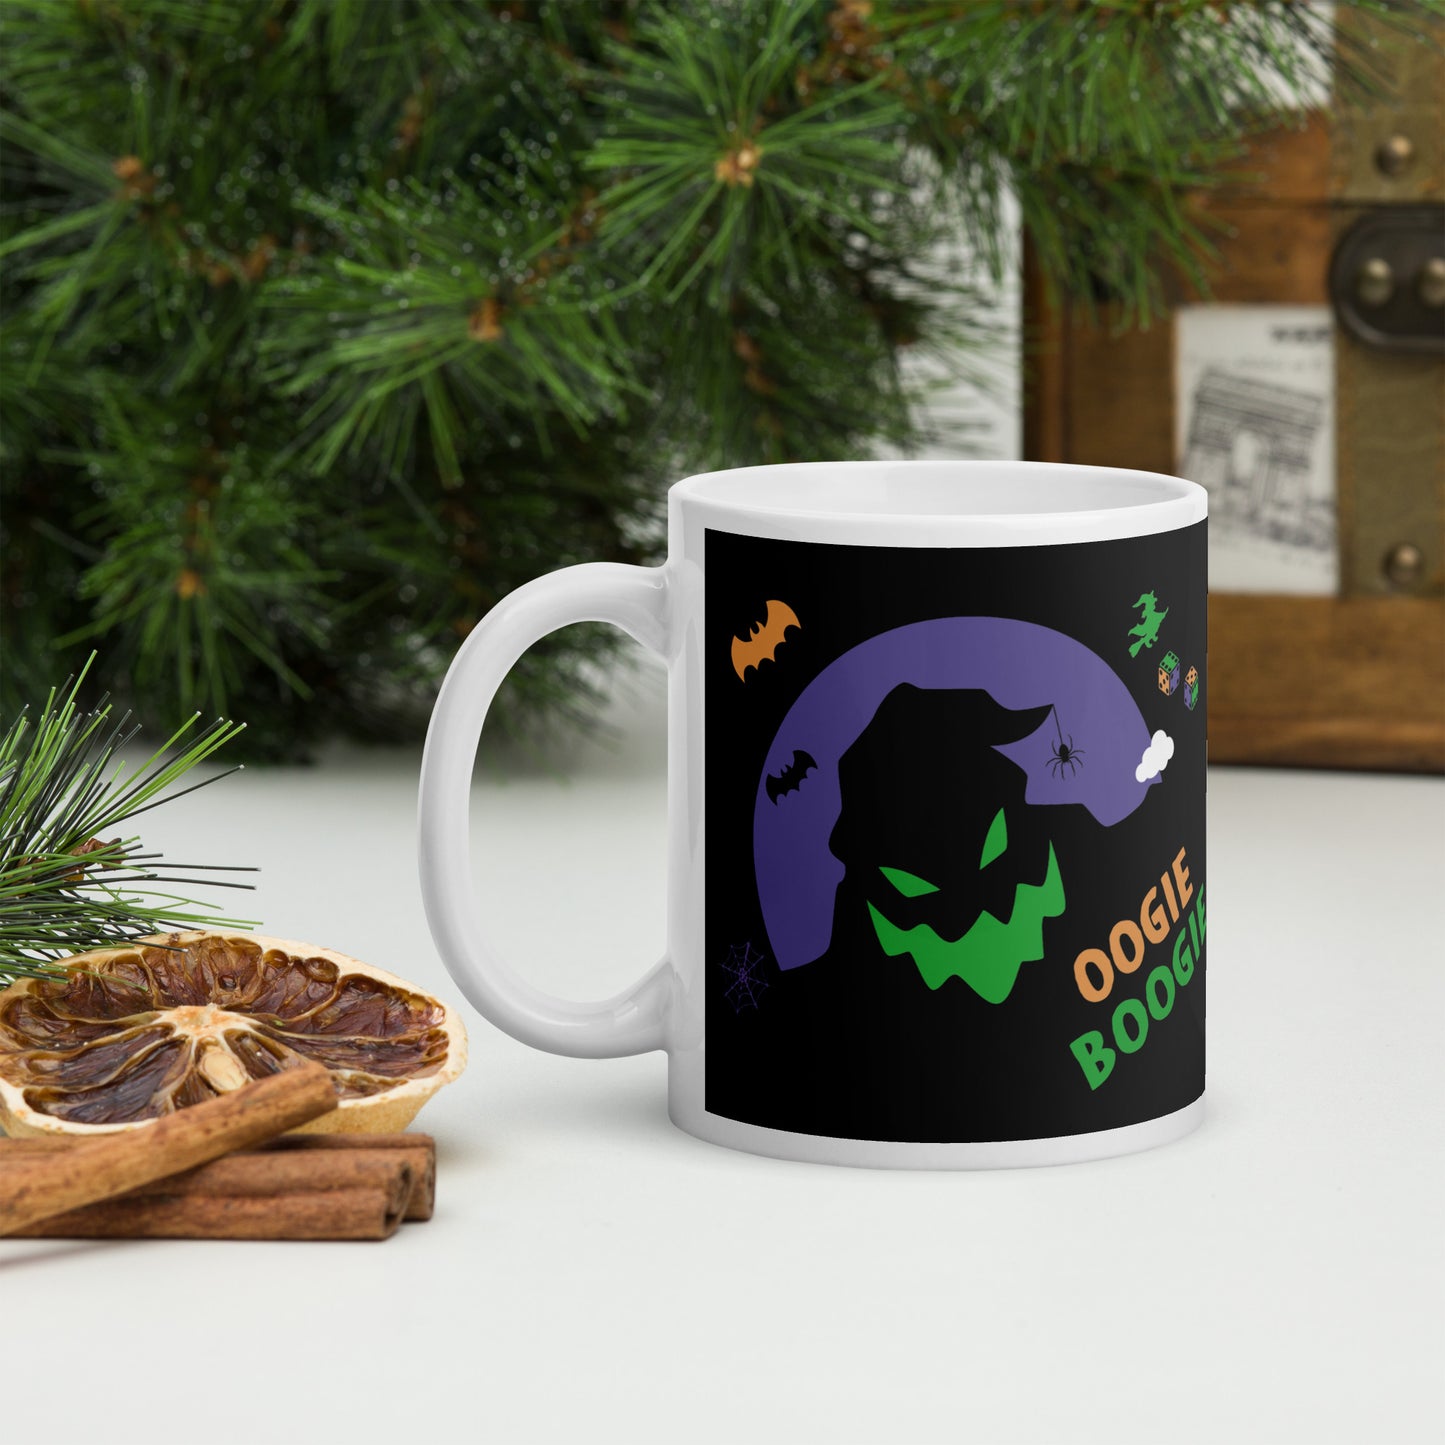 Oogie Boogie Taza